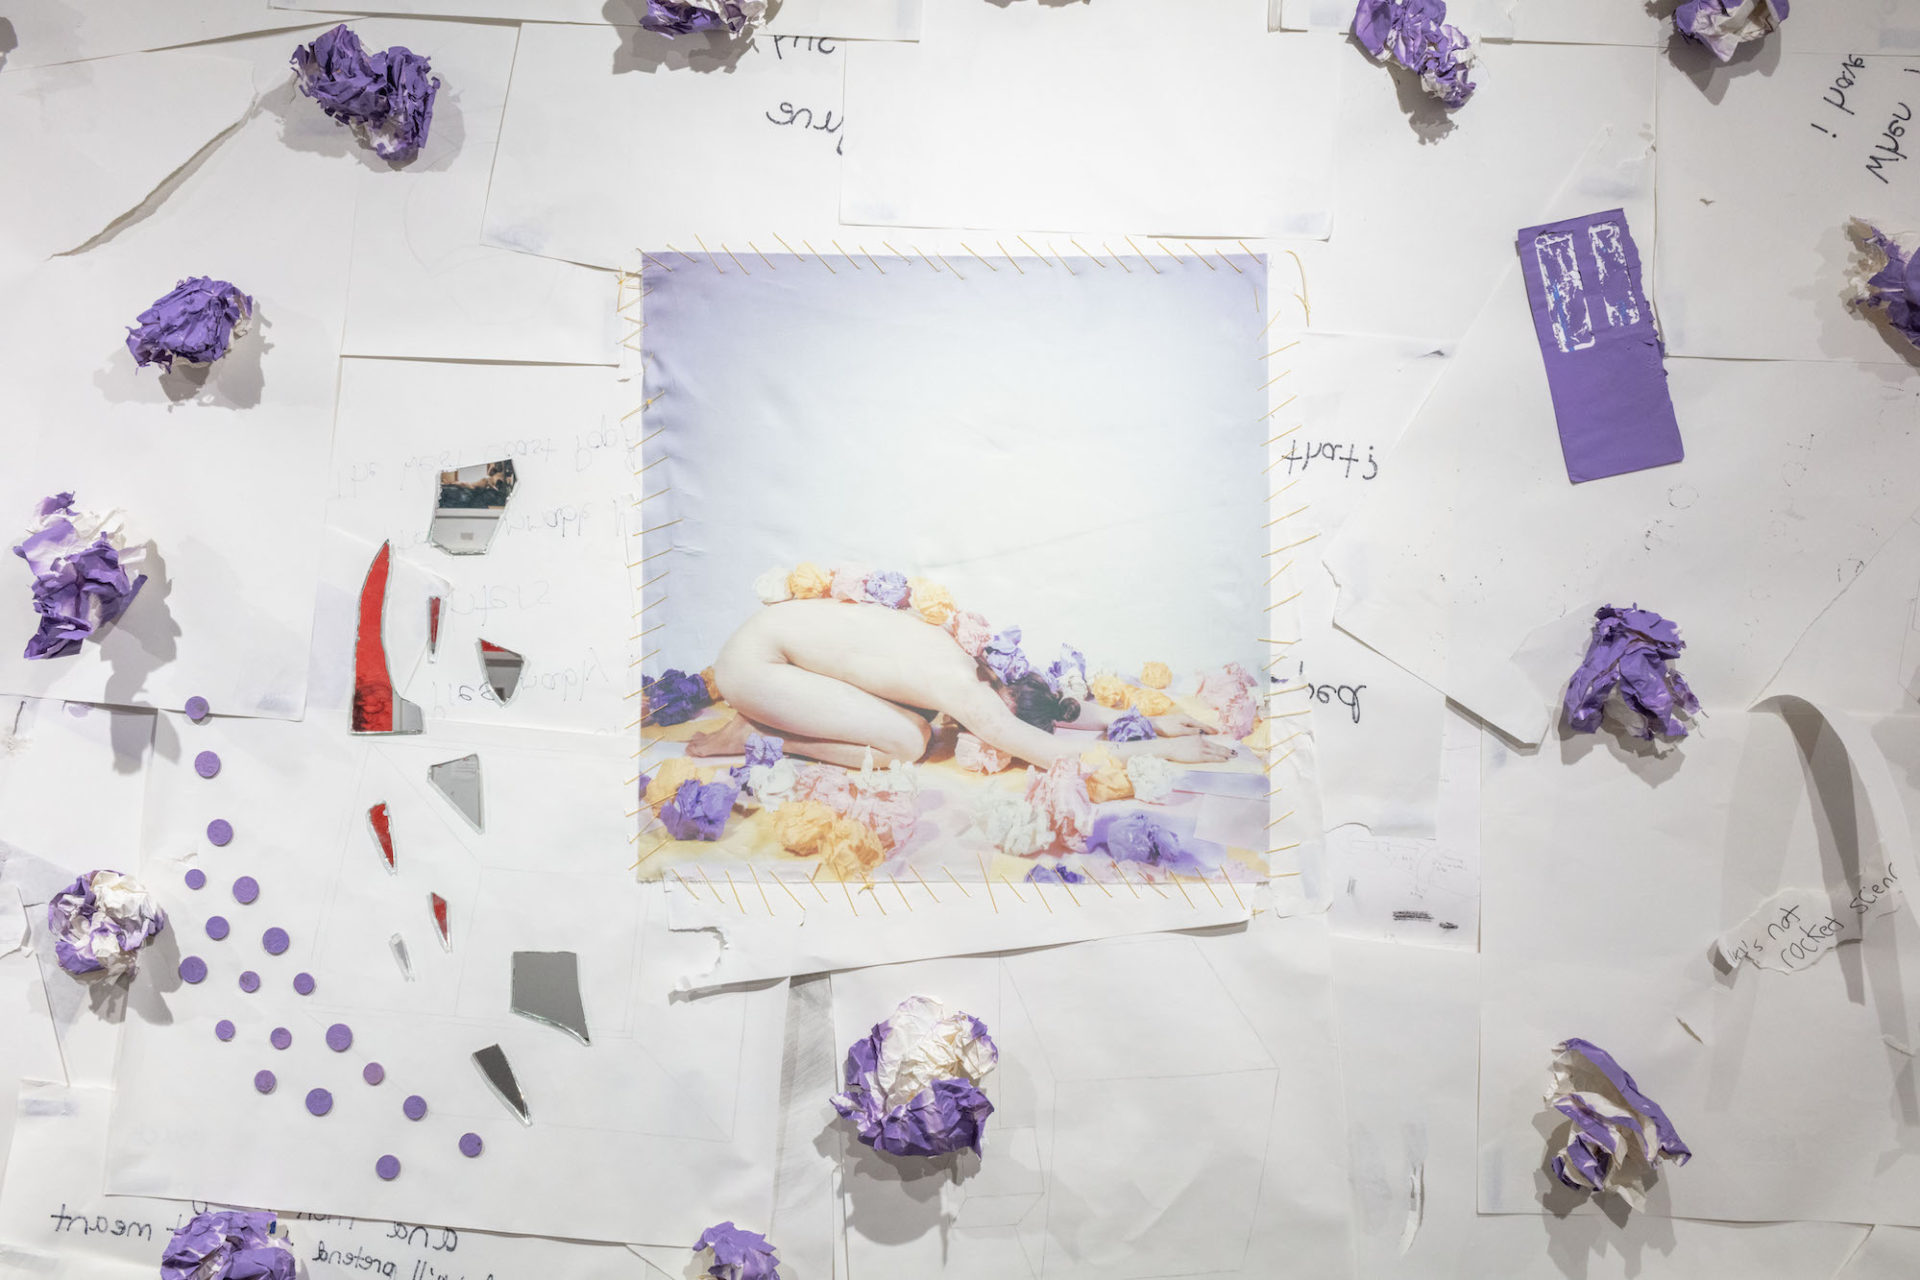 Multimedia artwork with a white paper overlapping to create the background with purple three dimensional pieces scattered about. In the center is a square photograph sewn onto the background. The photo is of a naked person in child's pose surrounded by more of the same purple crumpled papers including a line of them down the person's back as they are on the ground with their face to the ground and arms extended in front.